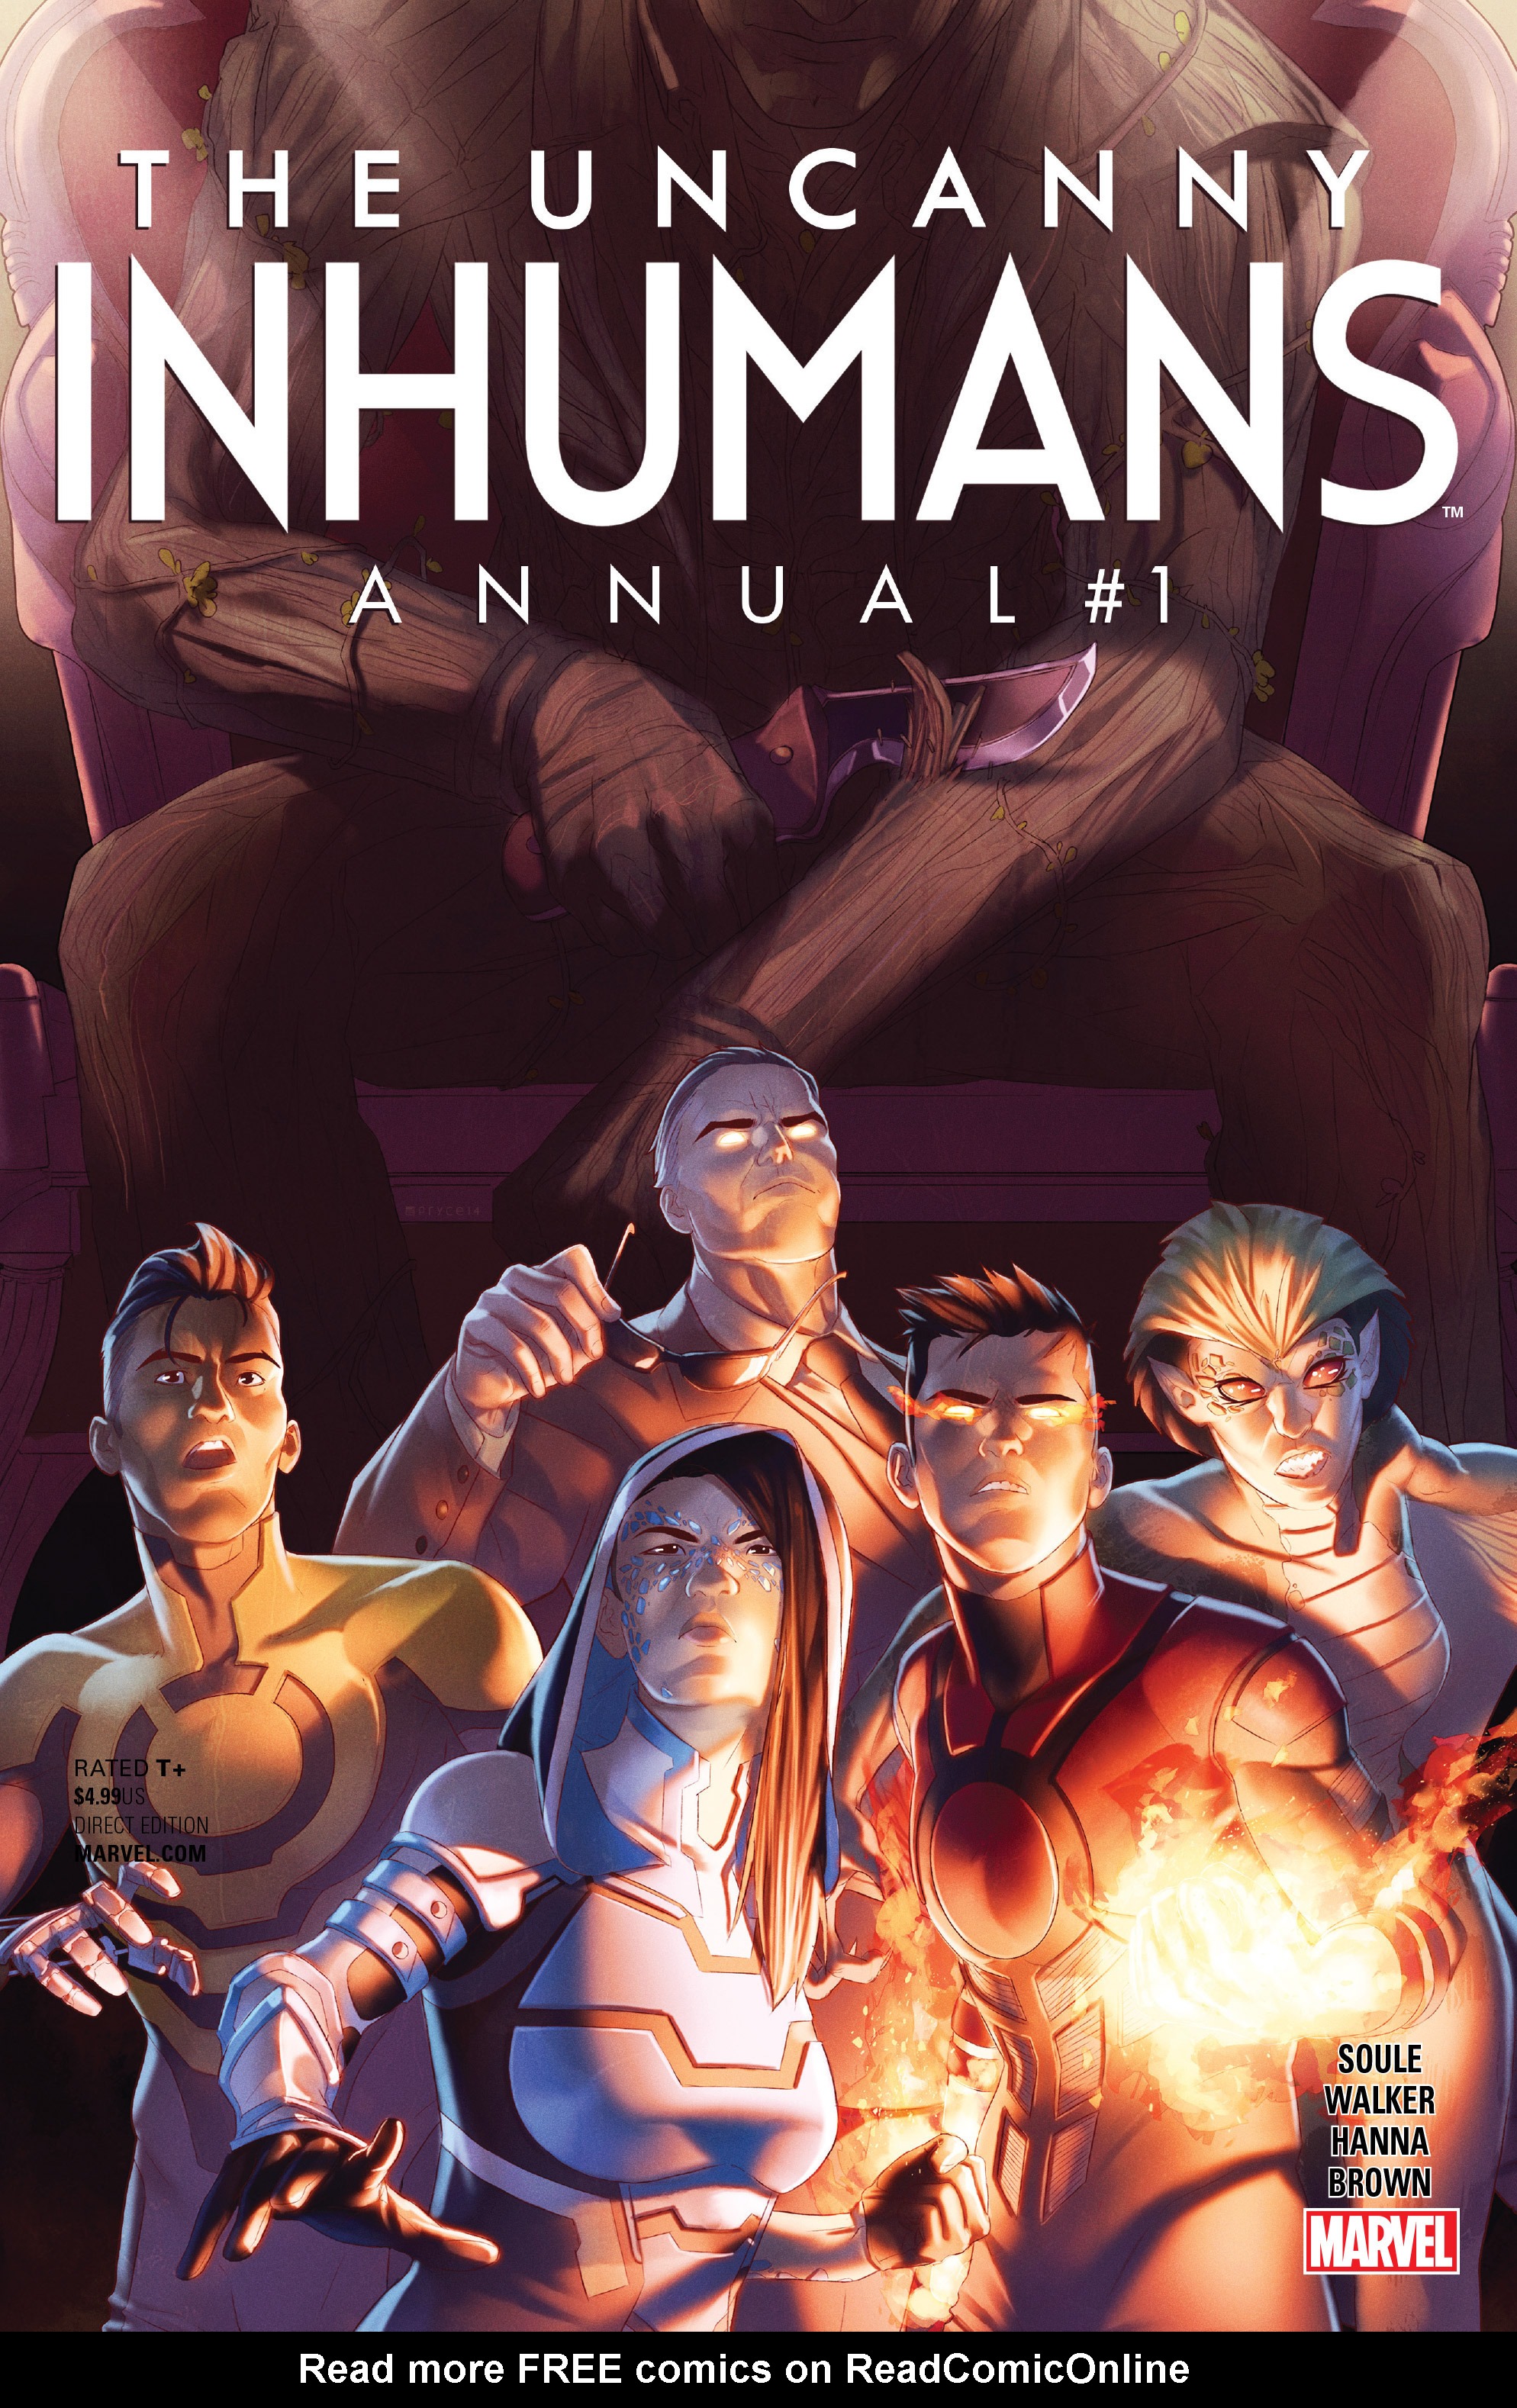 Read online The Uncanny Inhumans comic -  Issue # Annual 1 - 1